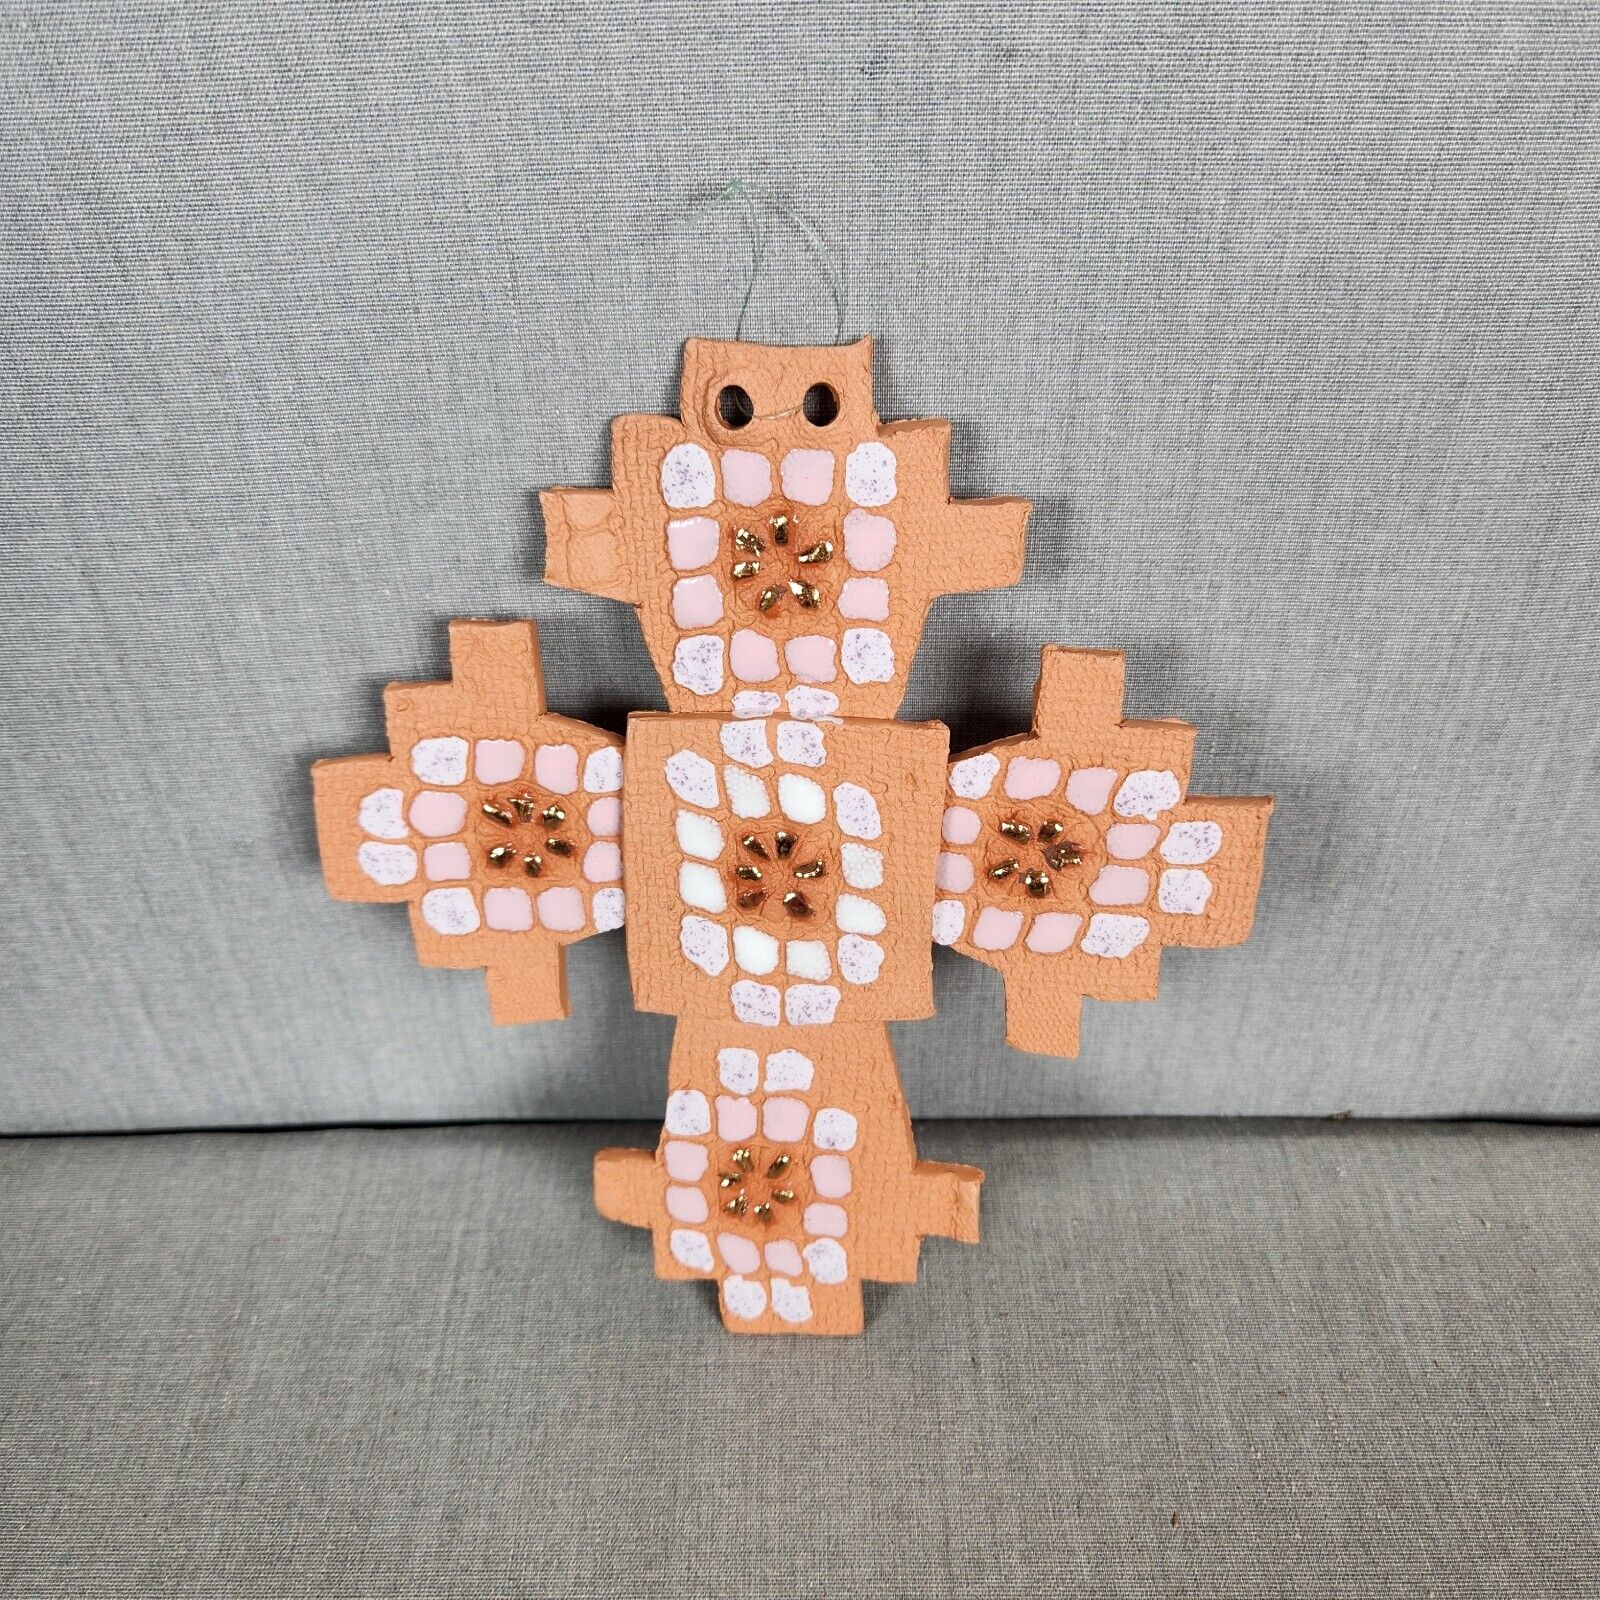 Southwestern Style Wall Cross Hanging Ornament from New Mexico Tile Stone